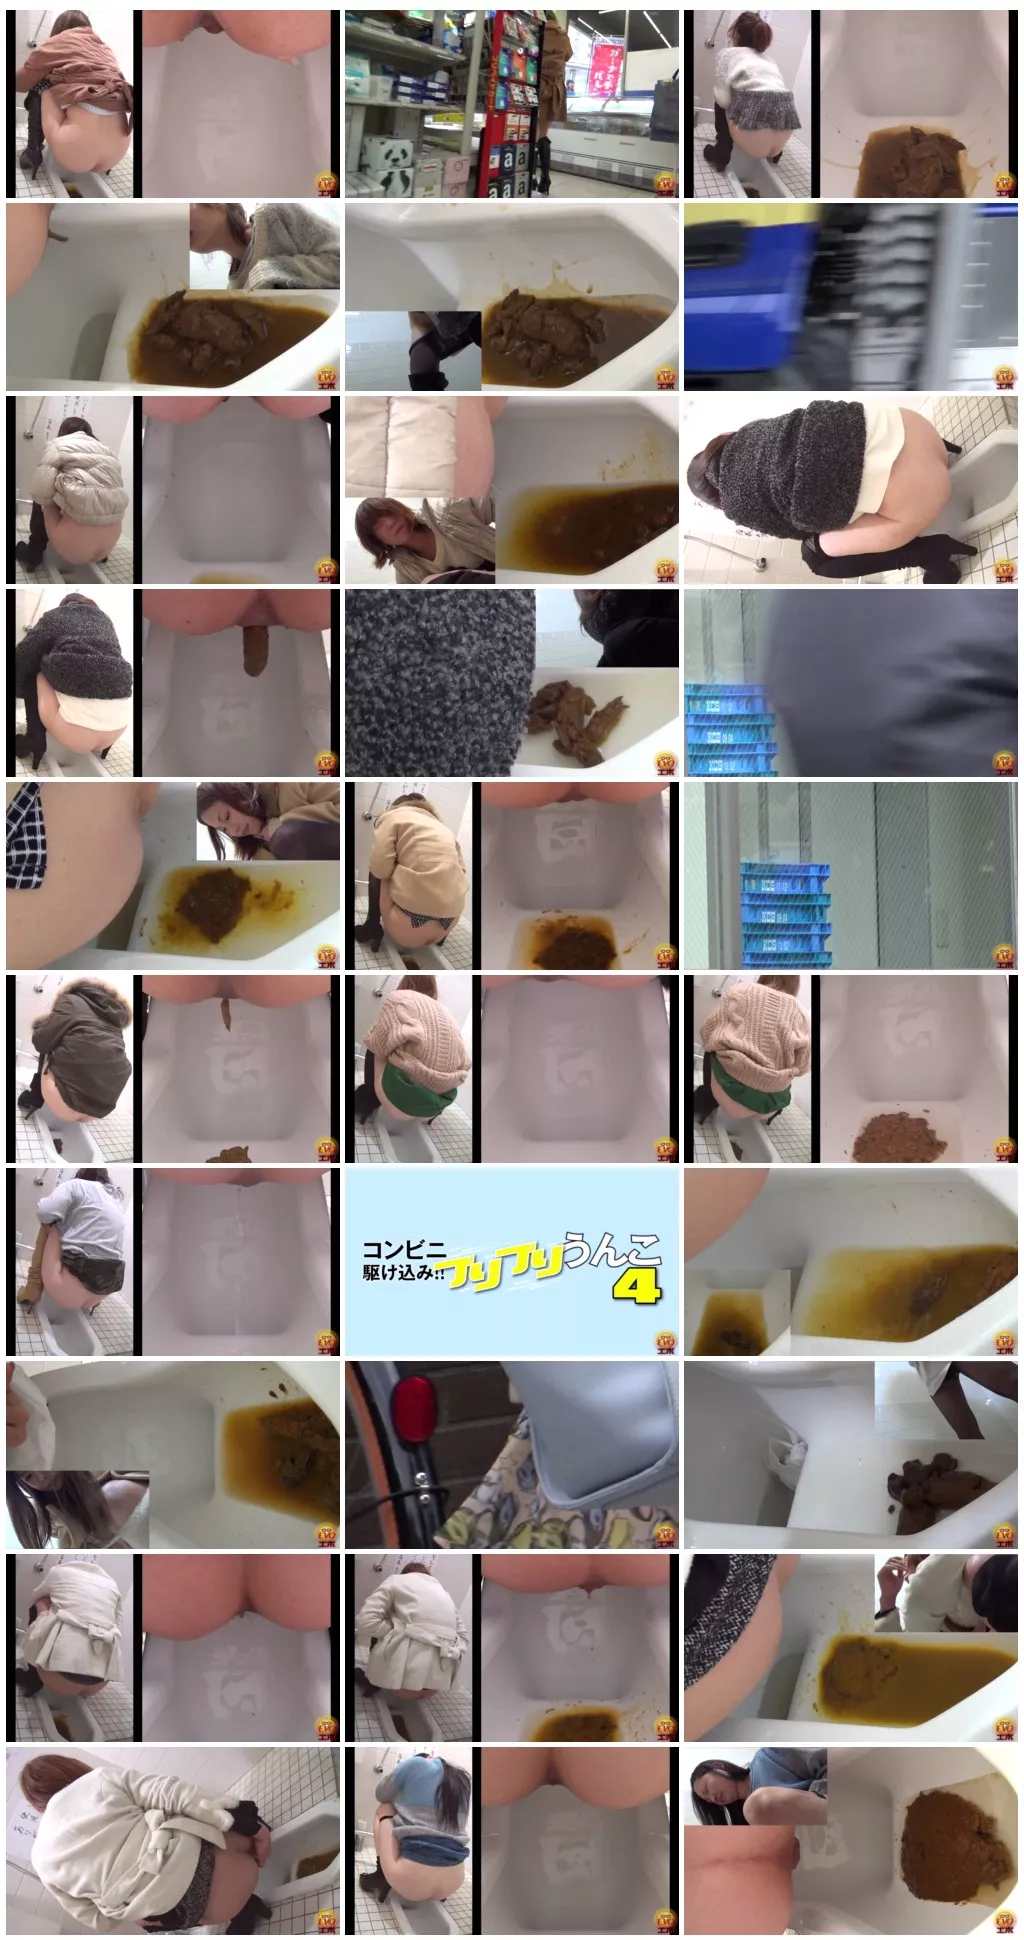 EE-048-03 Convenience Store Toilet Rush [Scat solo, shit, defecation, Pissing, Farting]